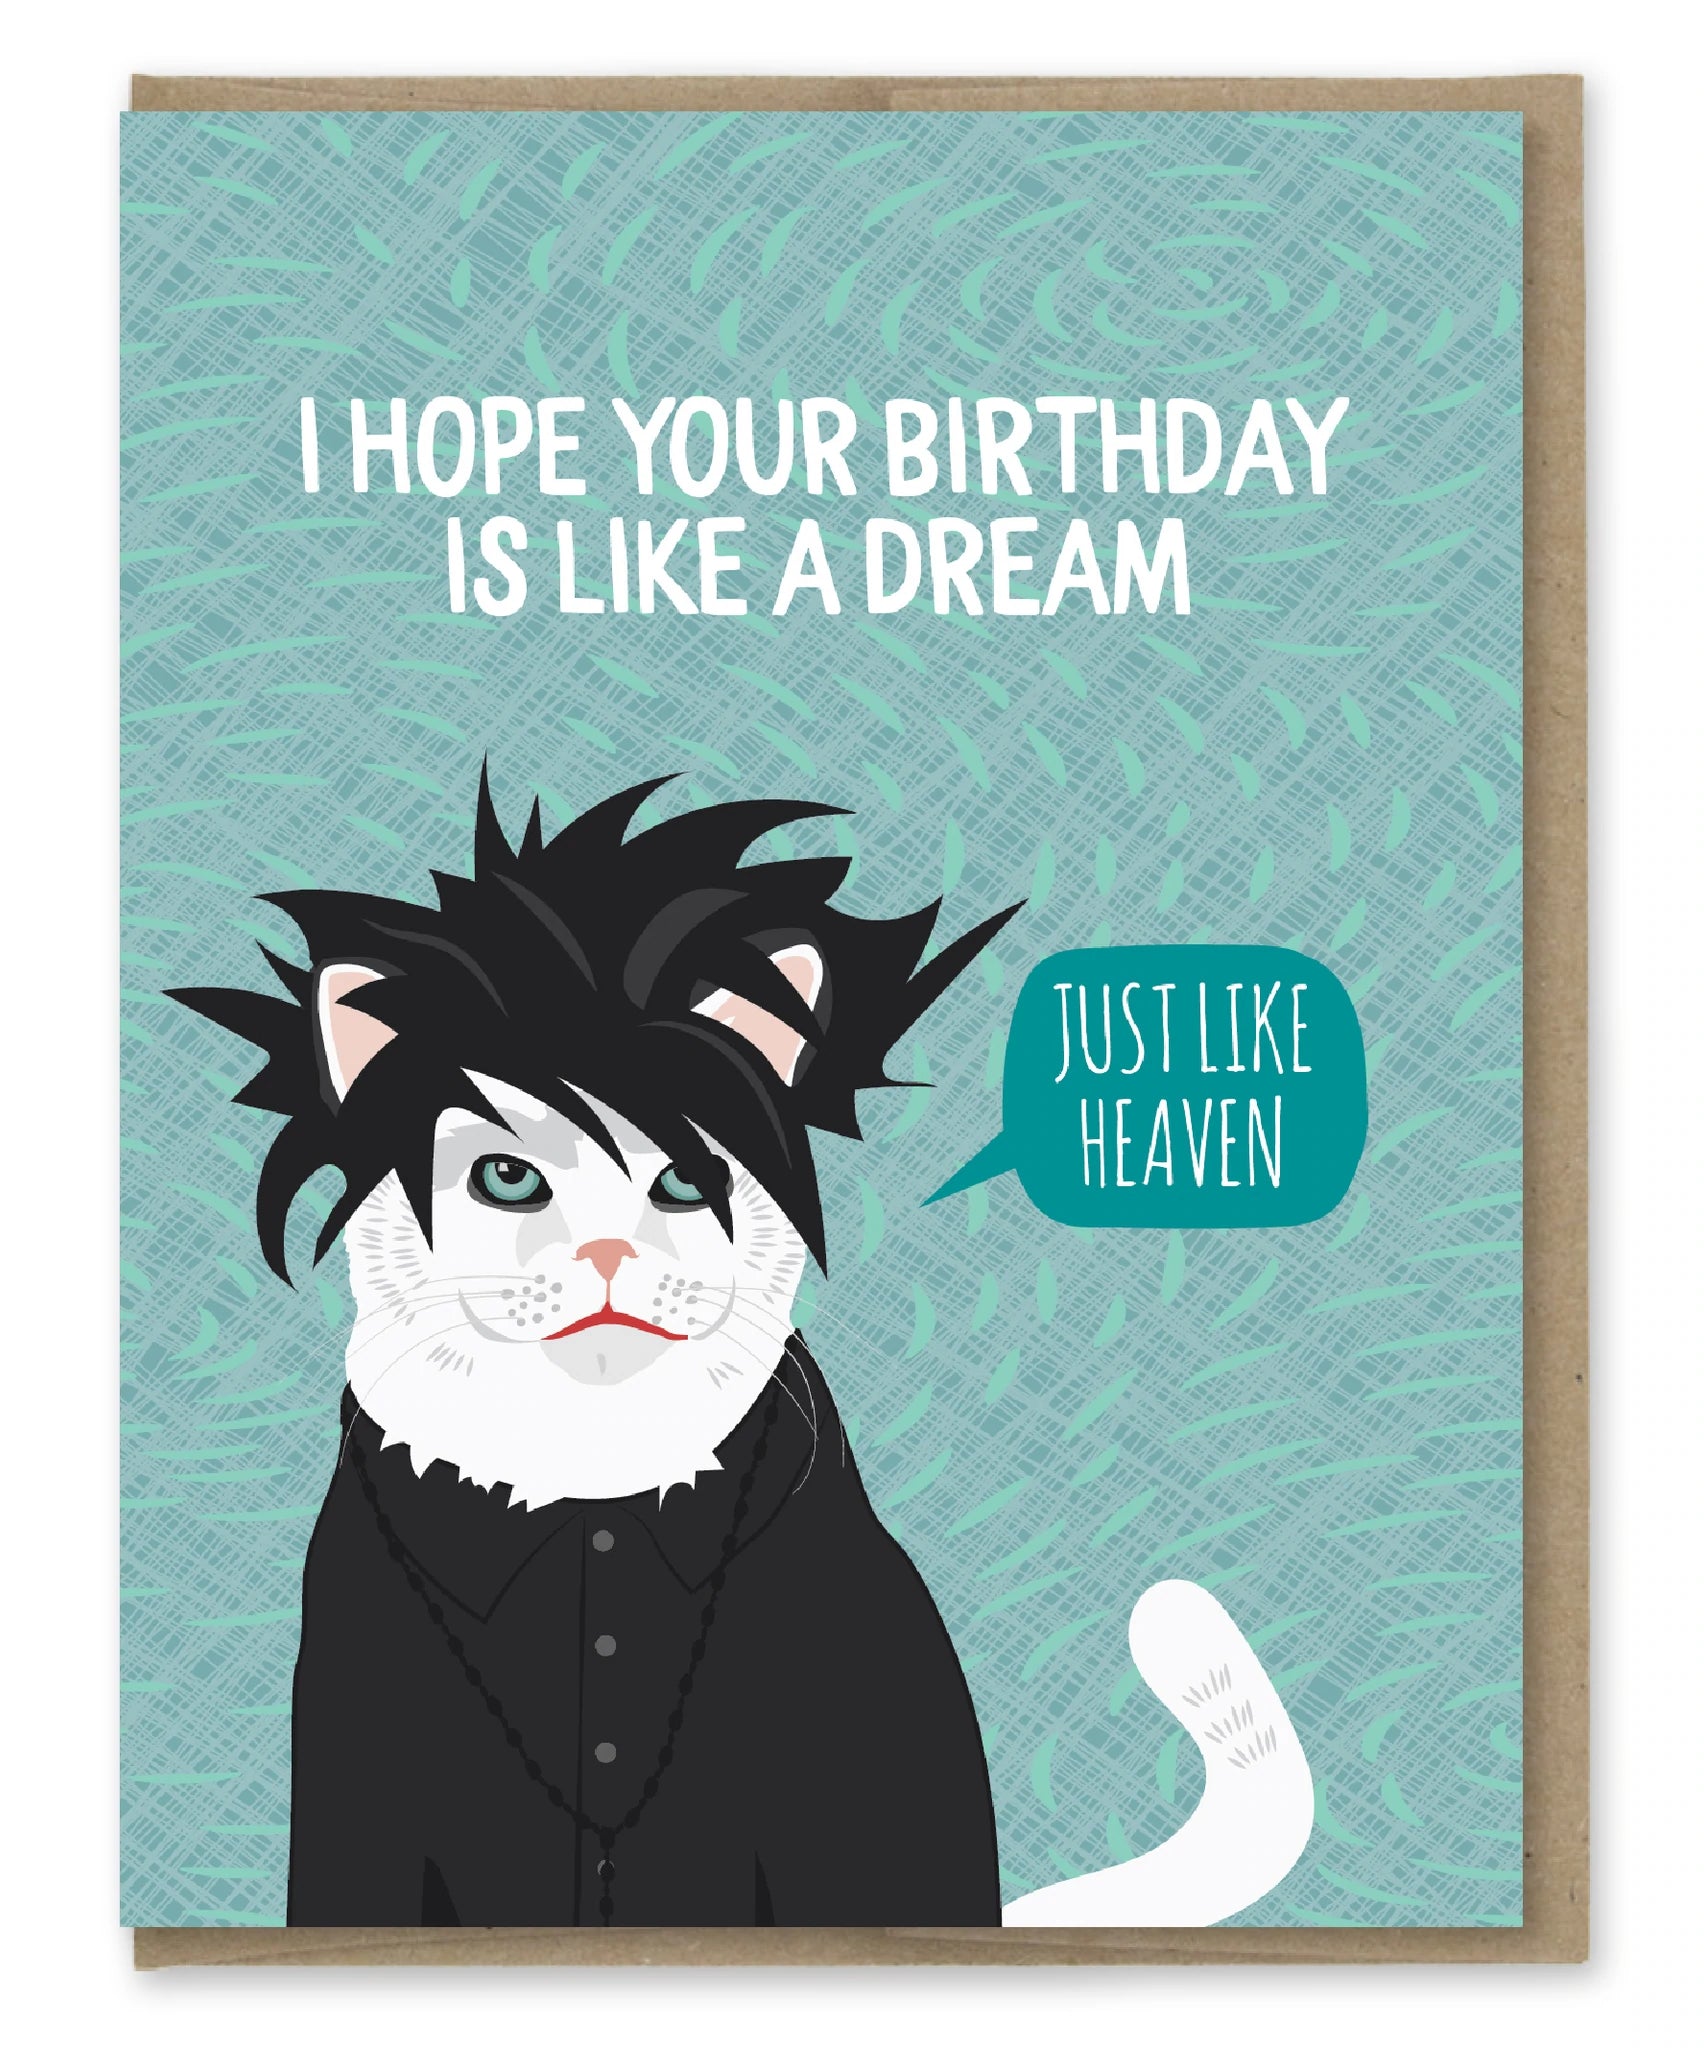 I hope your birthday is like a dream greeting card